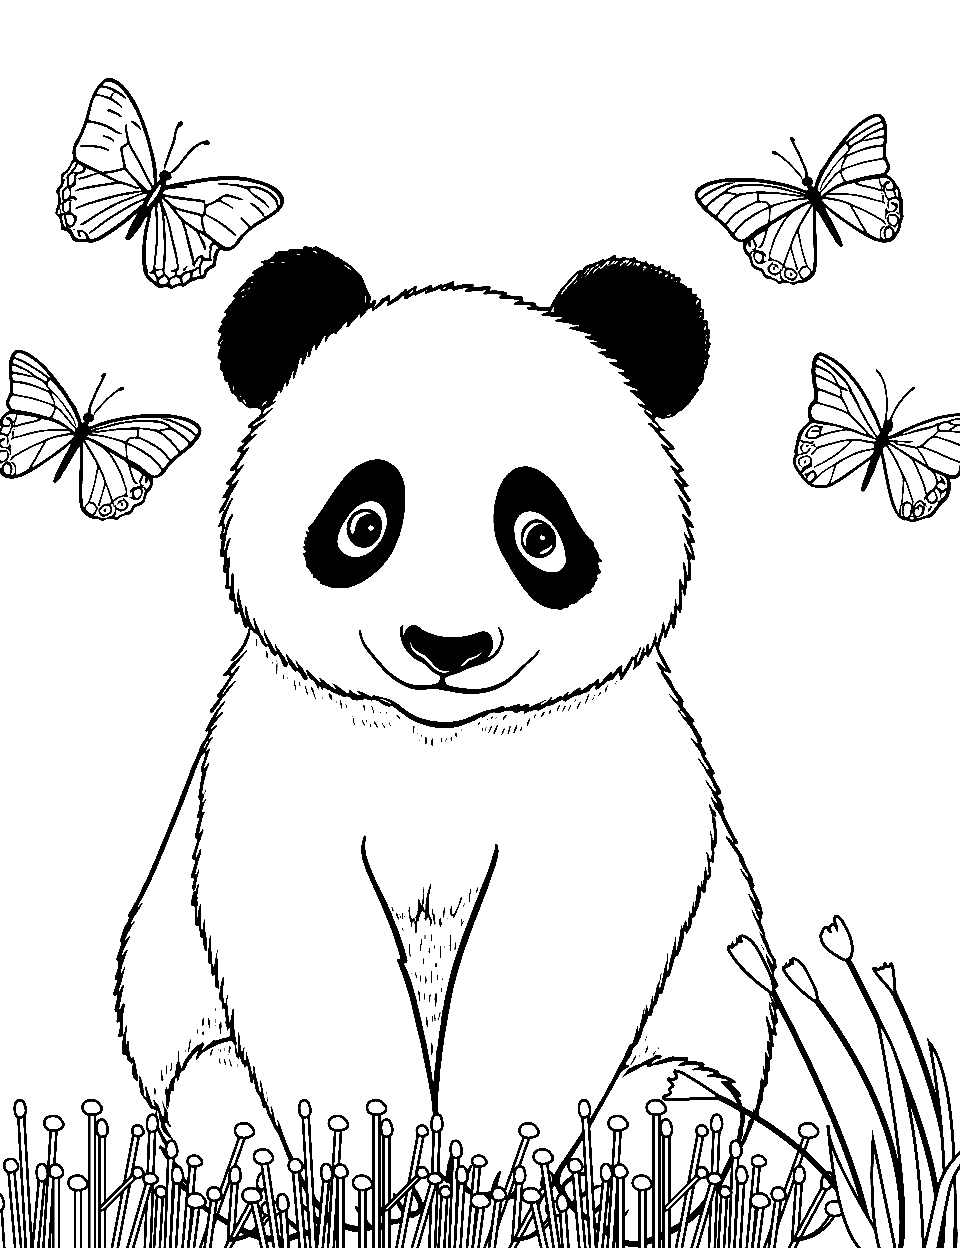 Panda and a Butterfly Coloring Page - A curious panda playing amongst butterflies and gentle foliage.